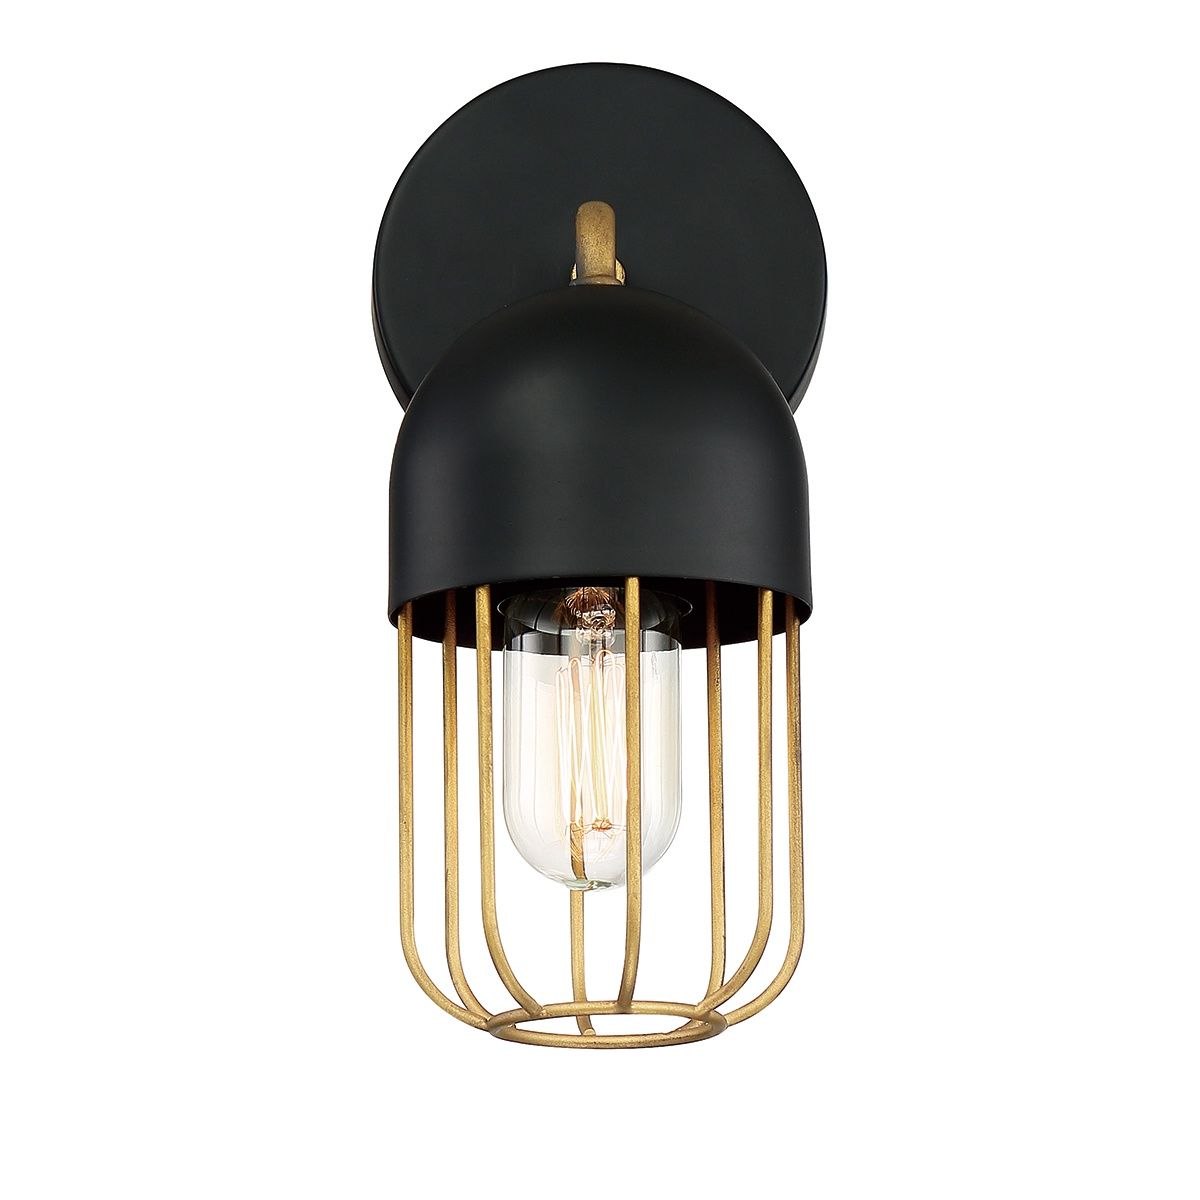 Palmerston 11 in. Armed Sconce Black Finish